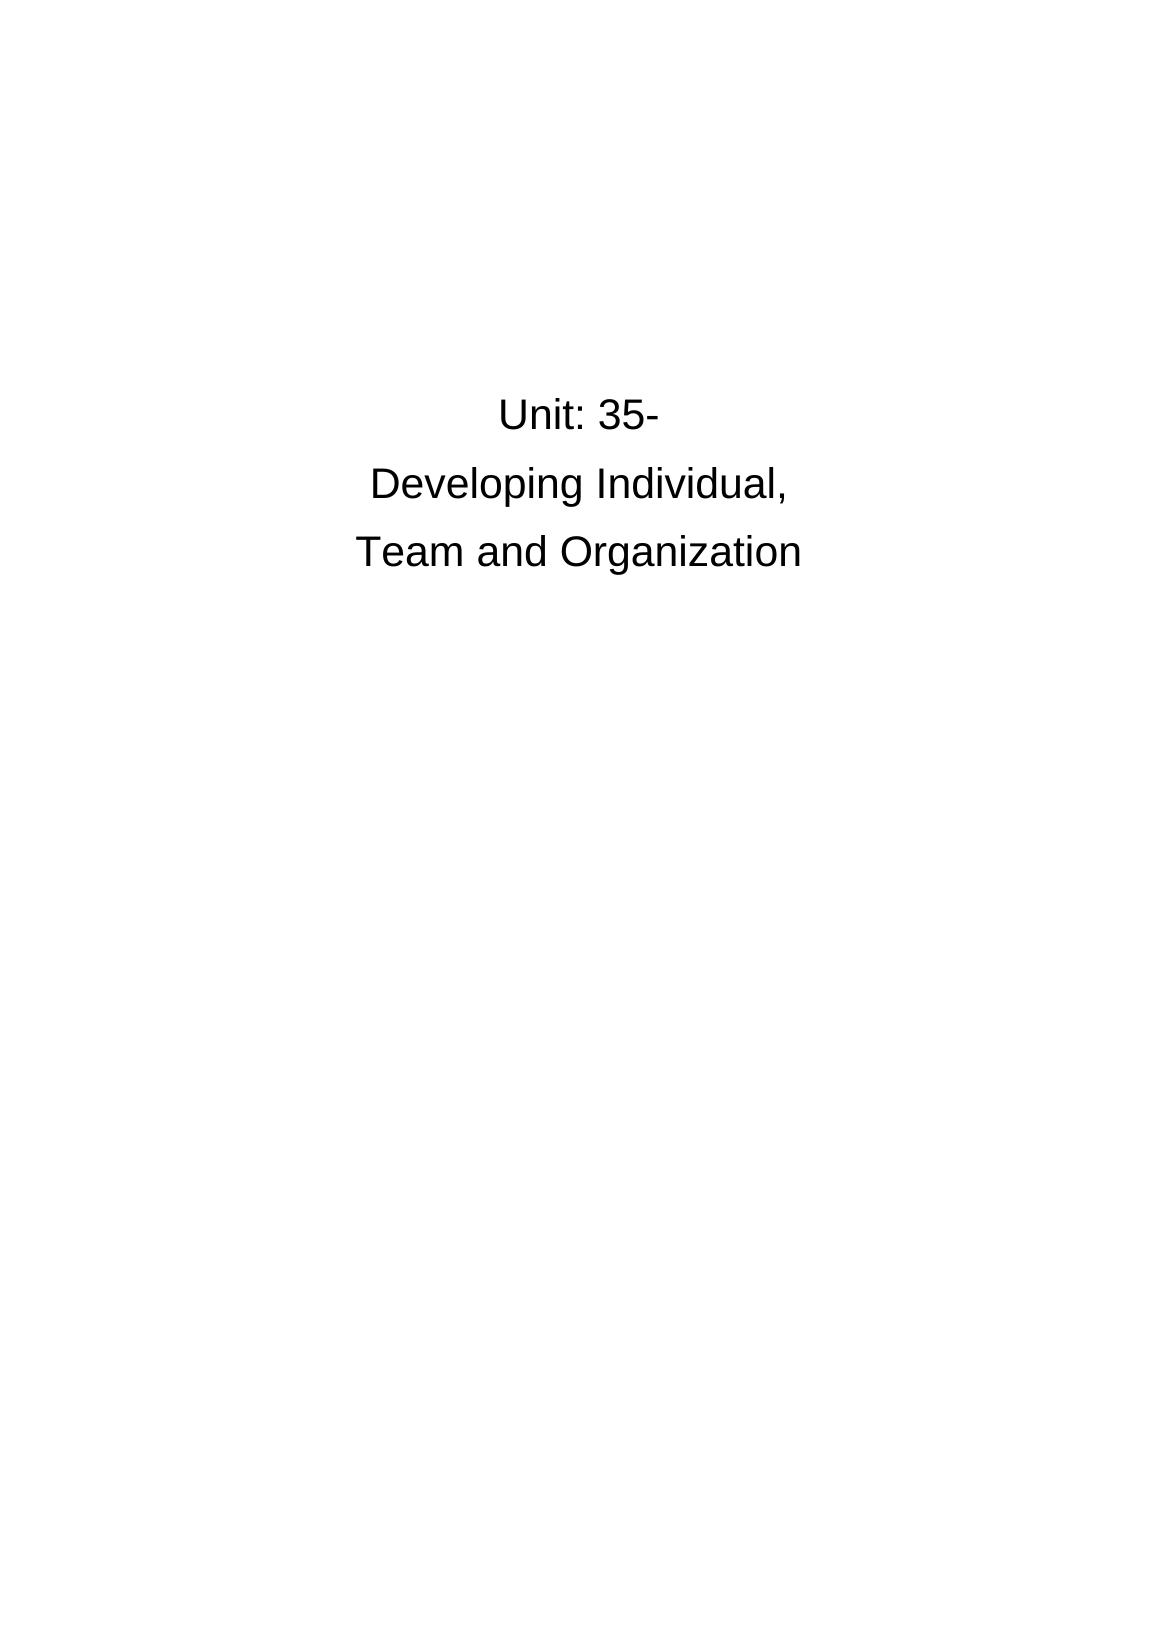 Unit: 35- Developing Individual, Team and Organization_1